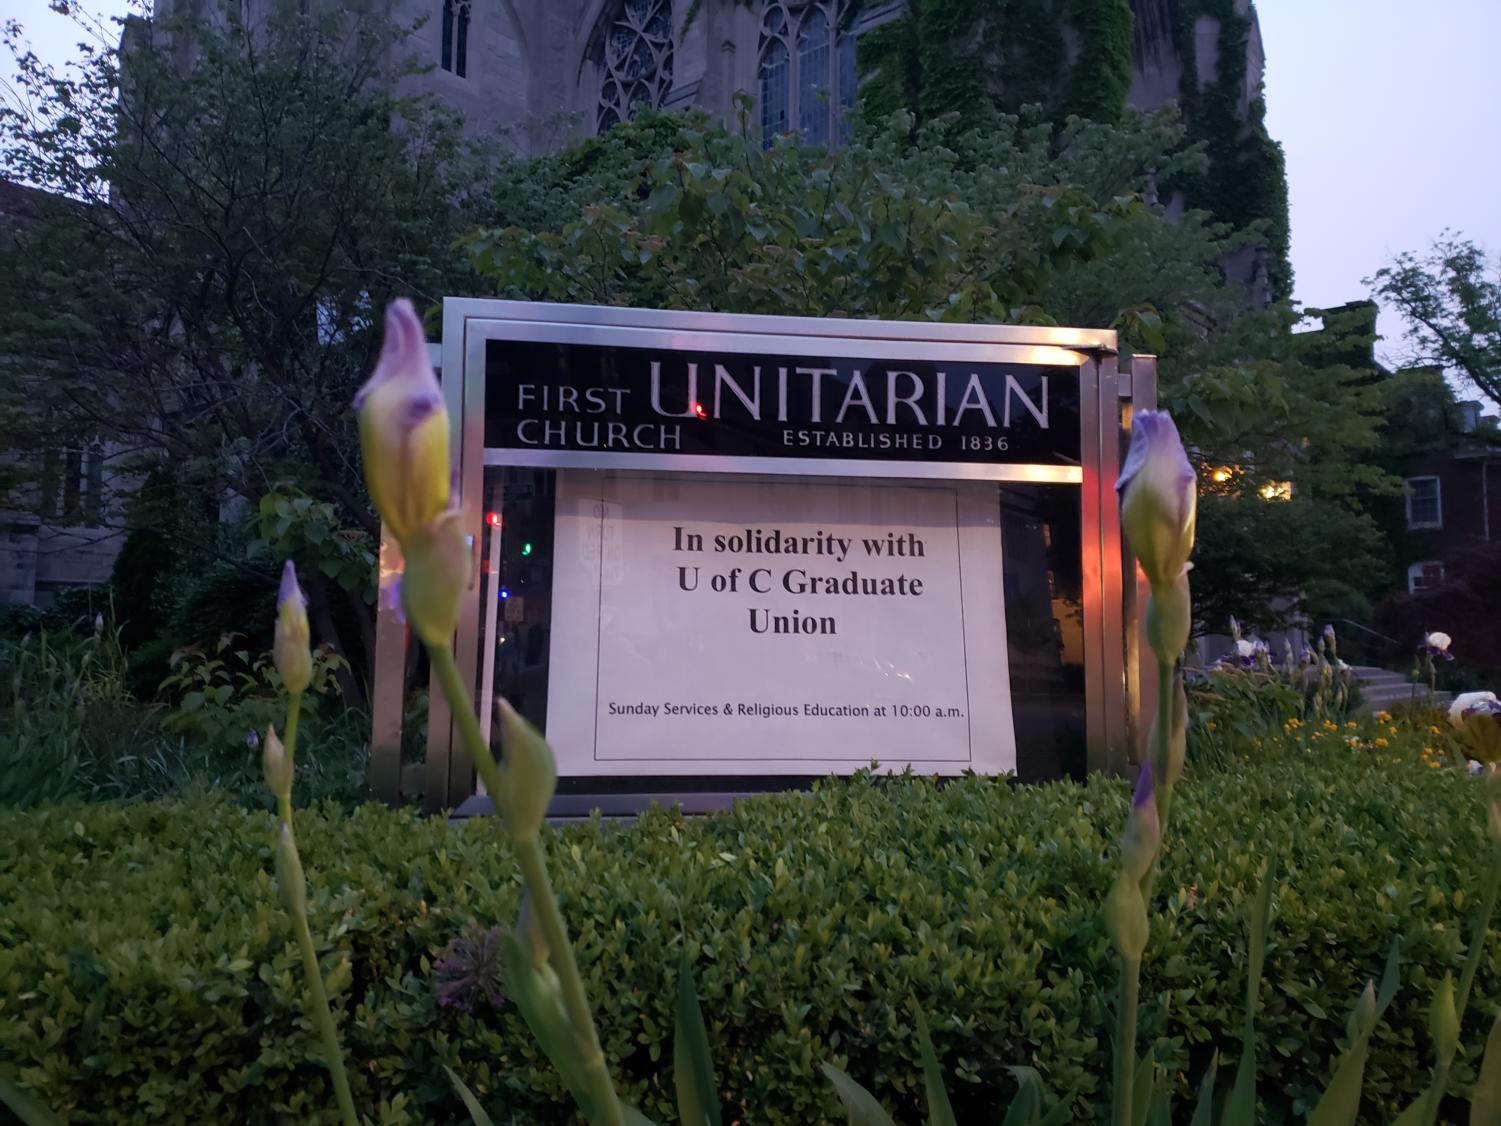 First Unitarian Church on 57th and Woodlawn has a sign up in support of GSU.